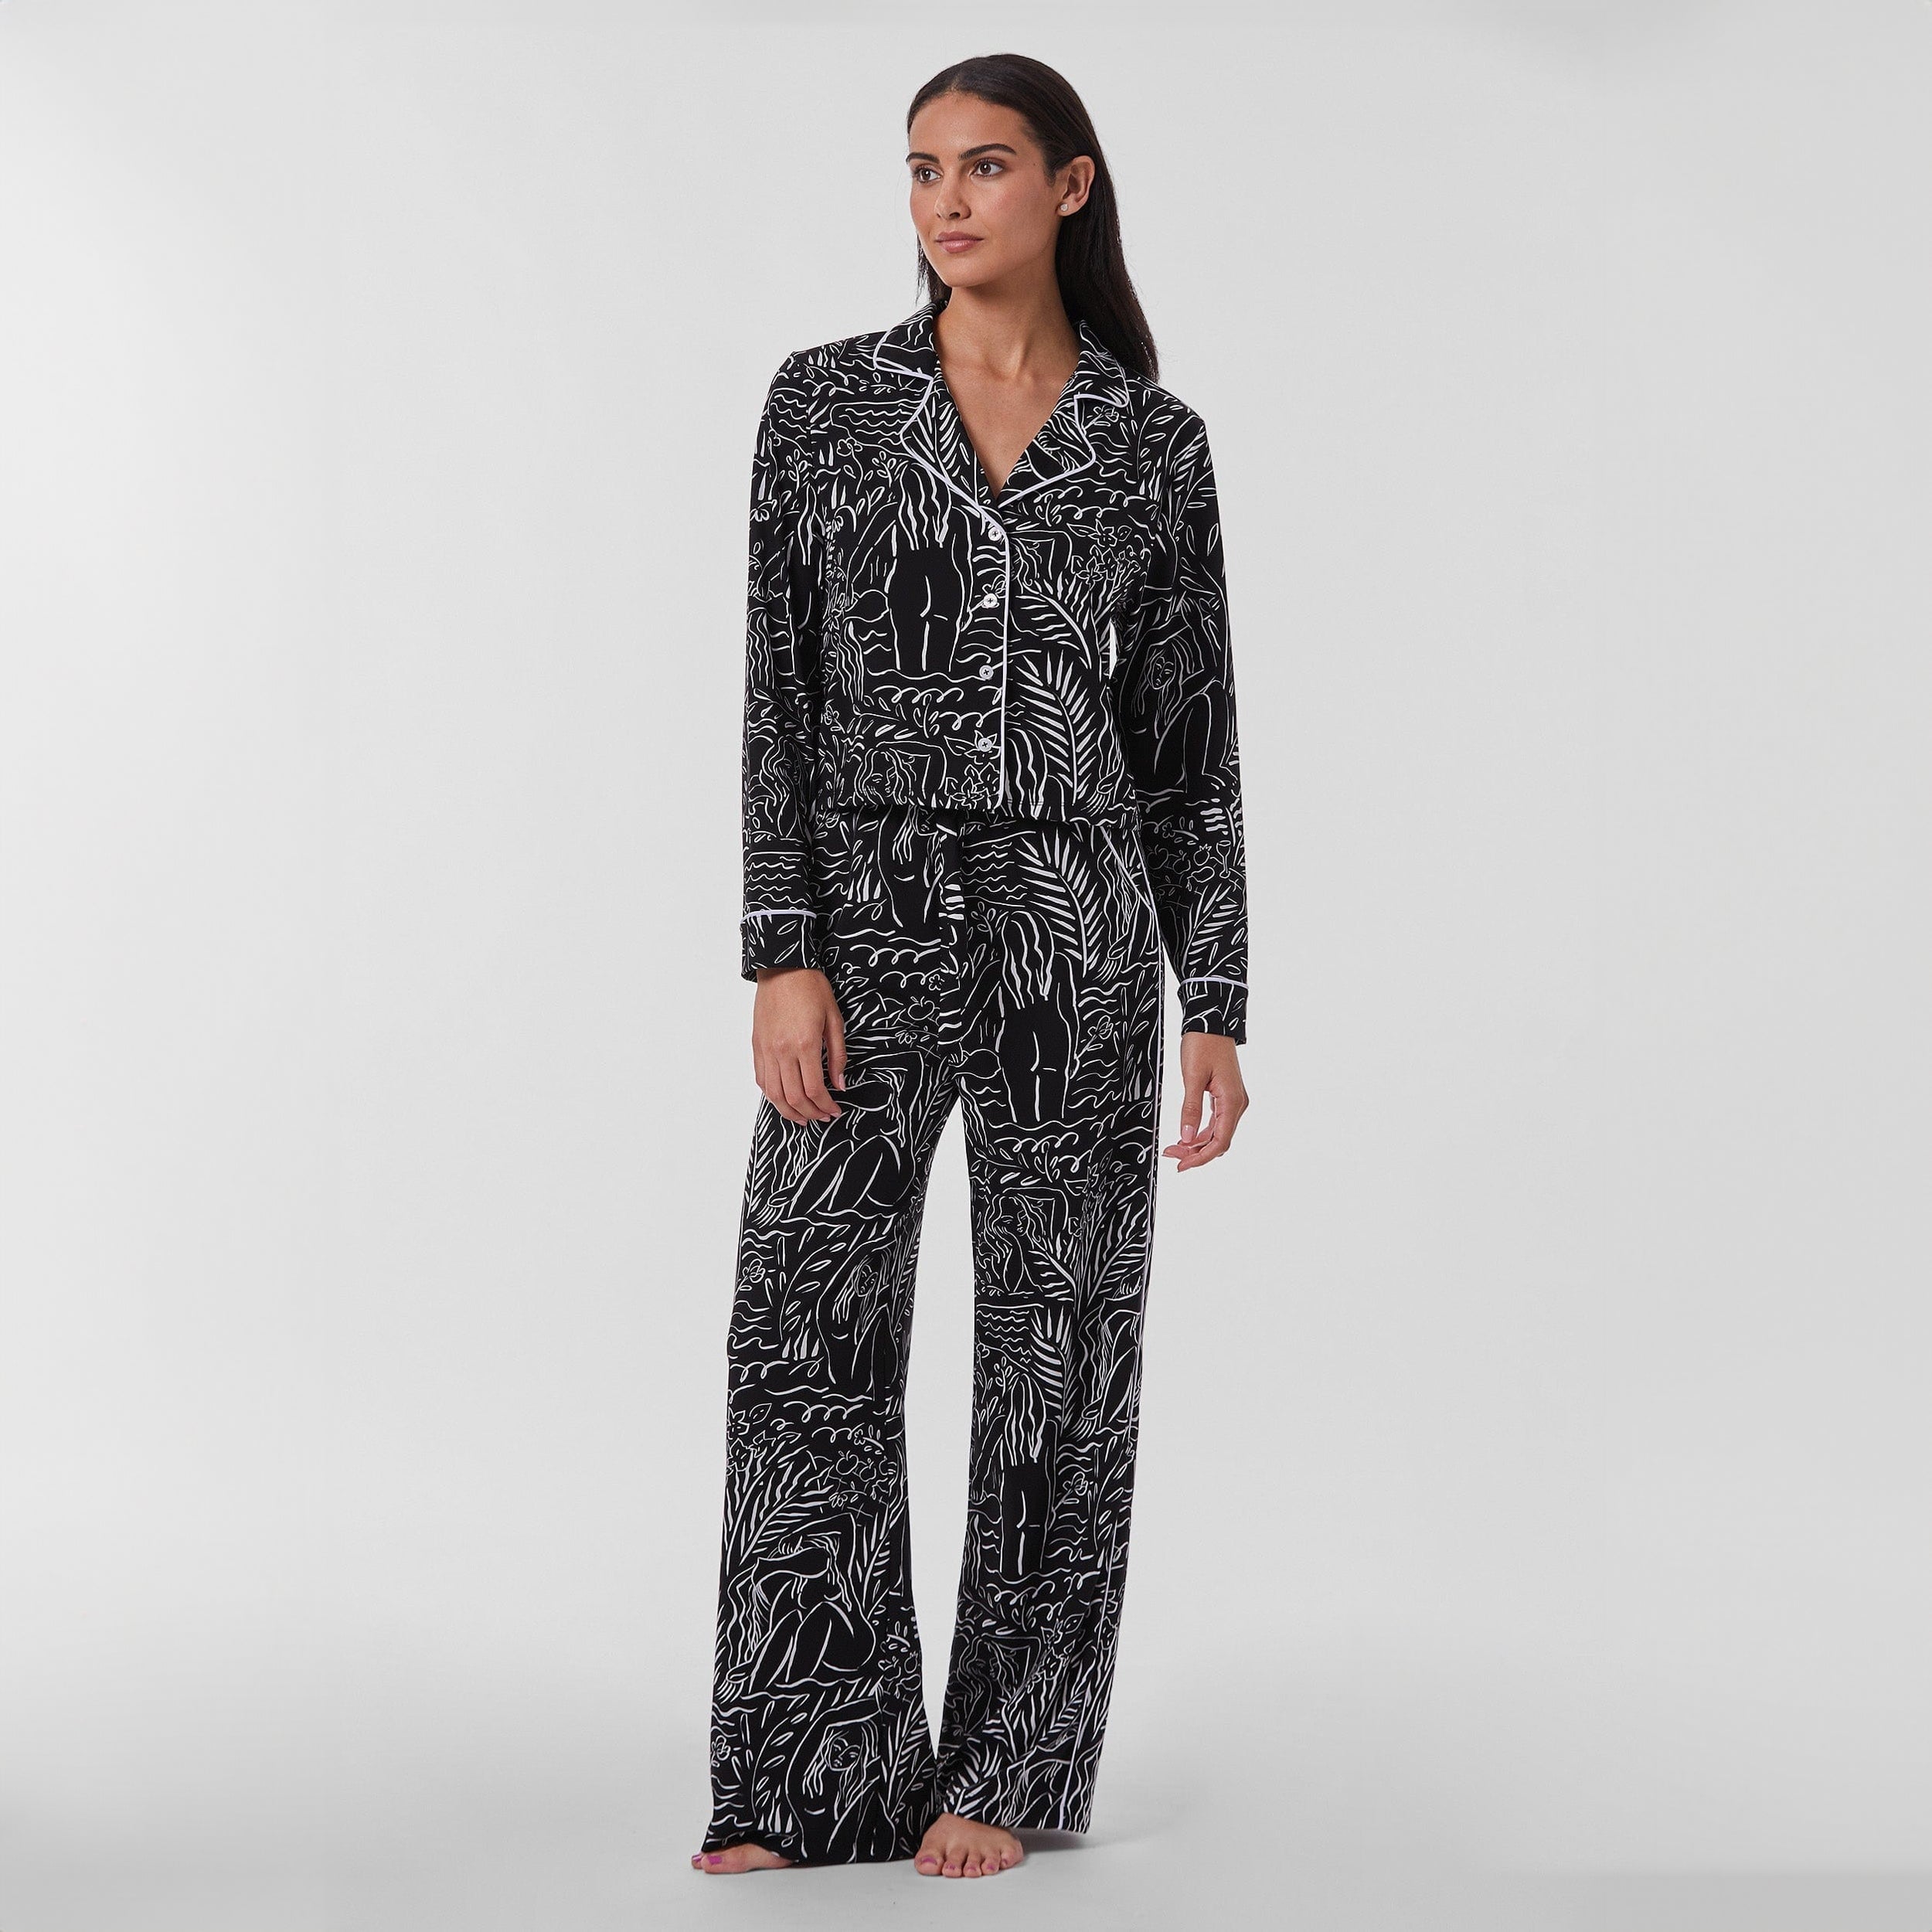 Full view of woman wearing breathable, relaxed and buttery smooth pajama pant featuring high-waist cut, side pockets, front tie and stunning Venus print.